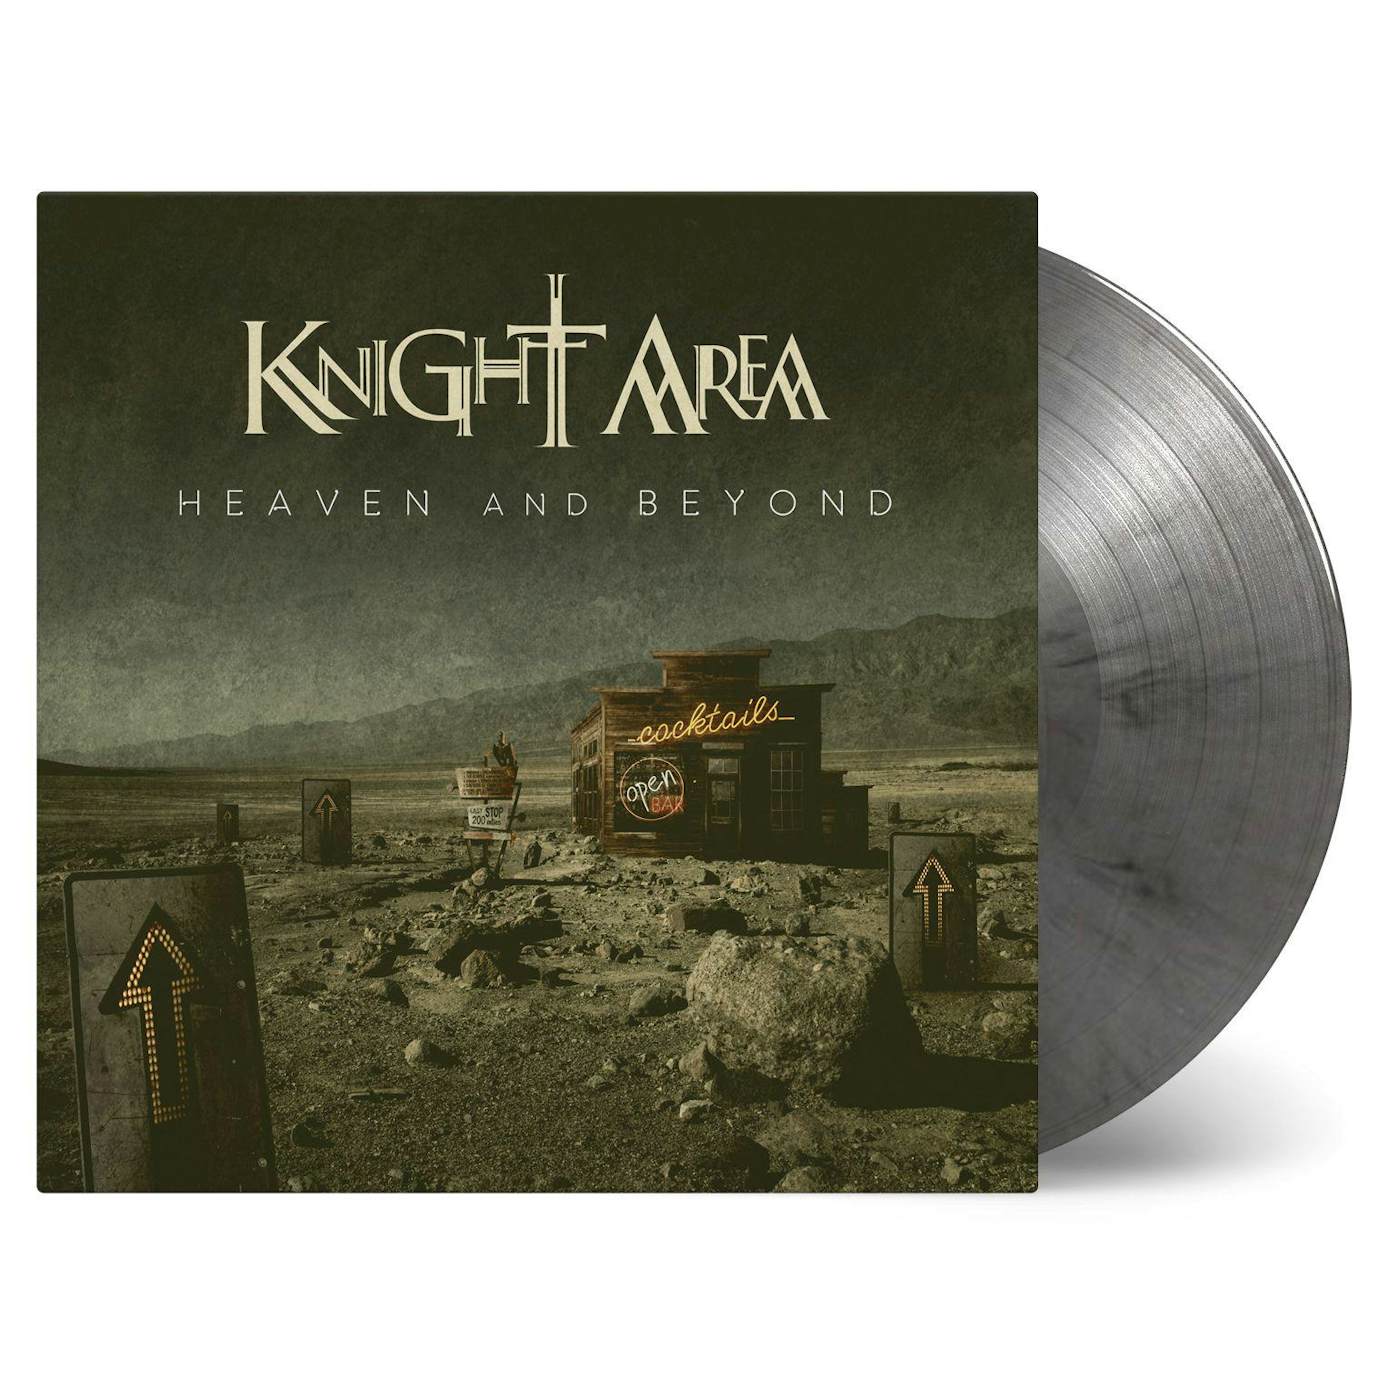 Knight Area HEAVEN & BEYOND (2LP/LIMITED SILVER & BLACK MIXED COLORED VINYL/180G/DL/GATEFOLD/NUMBERED) Vinyl Record